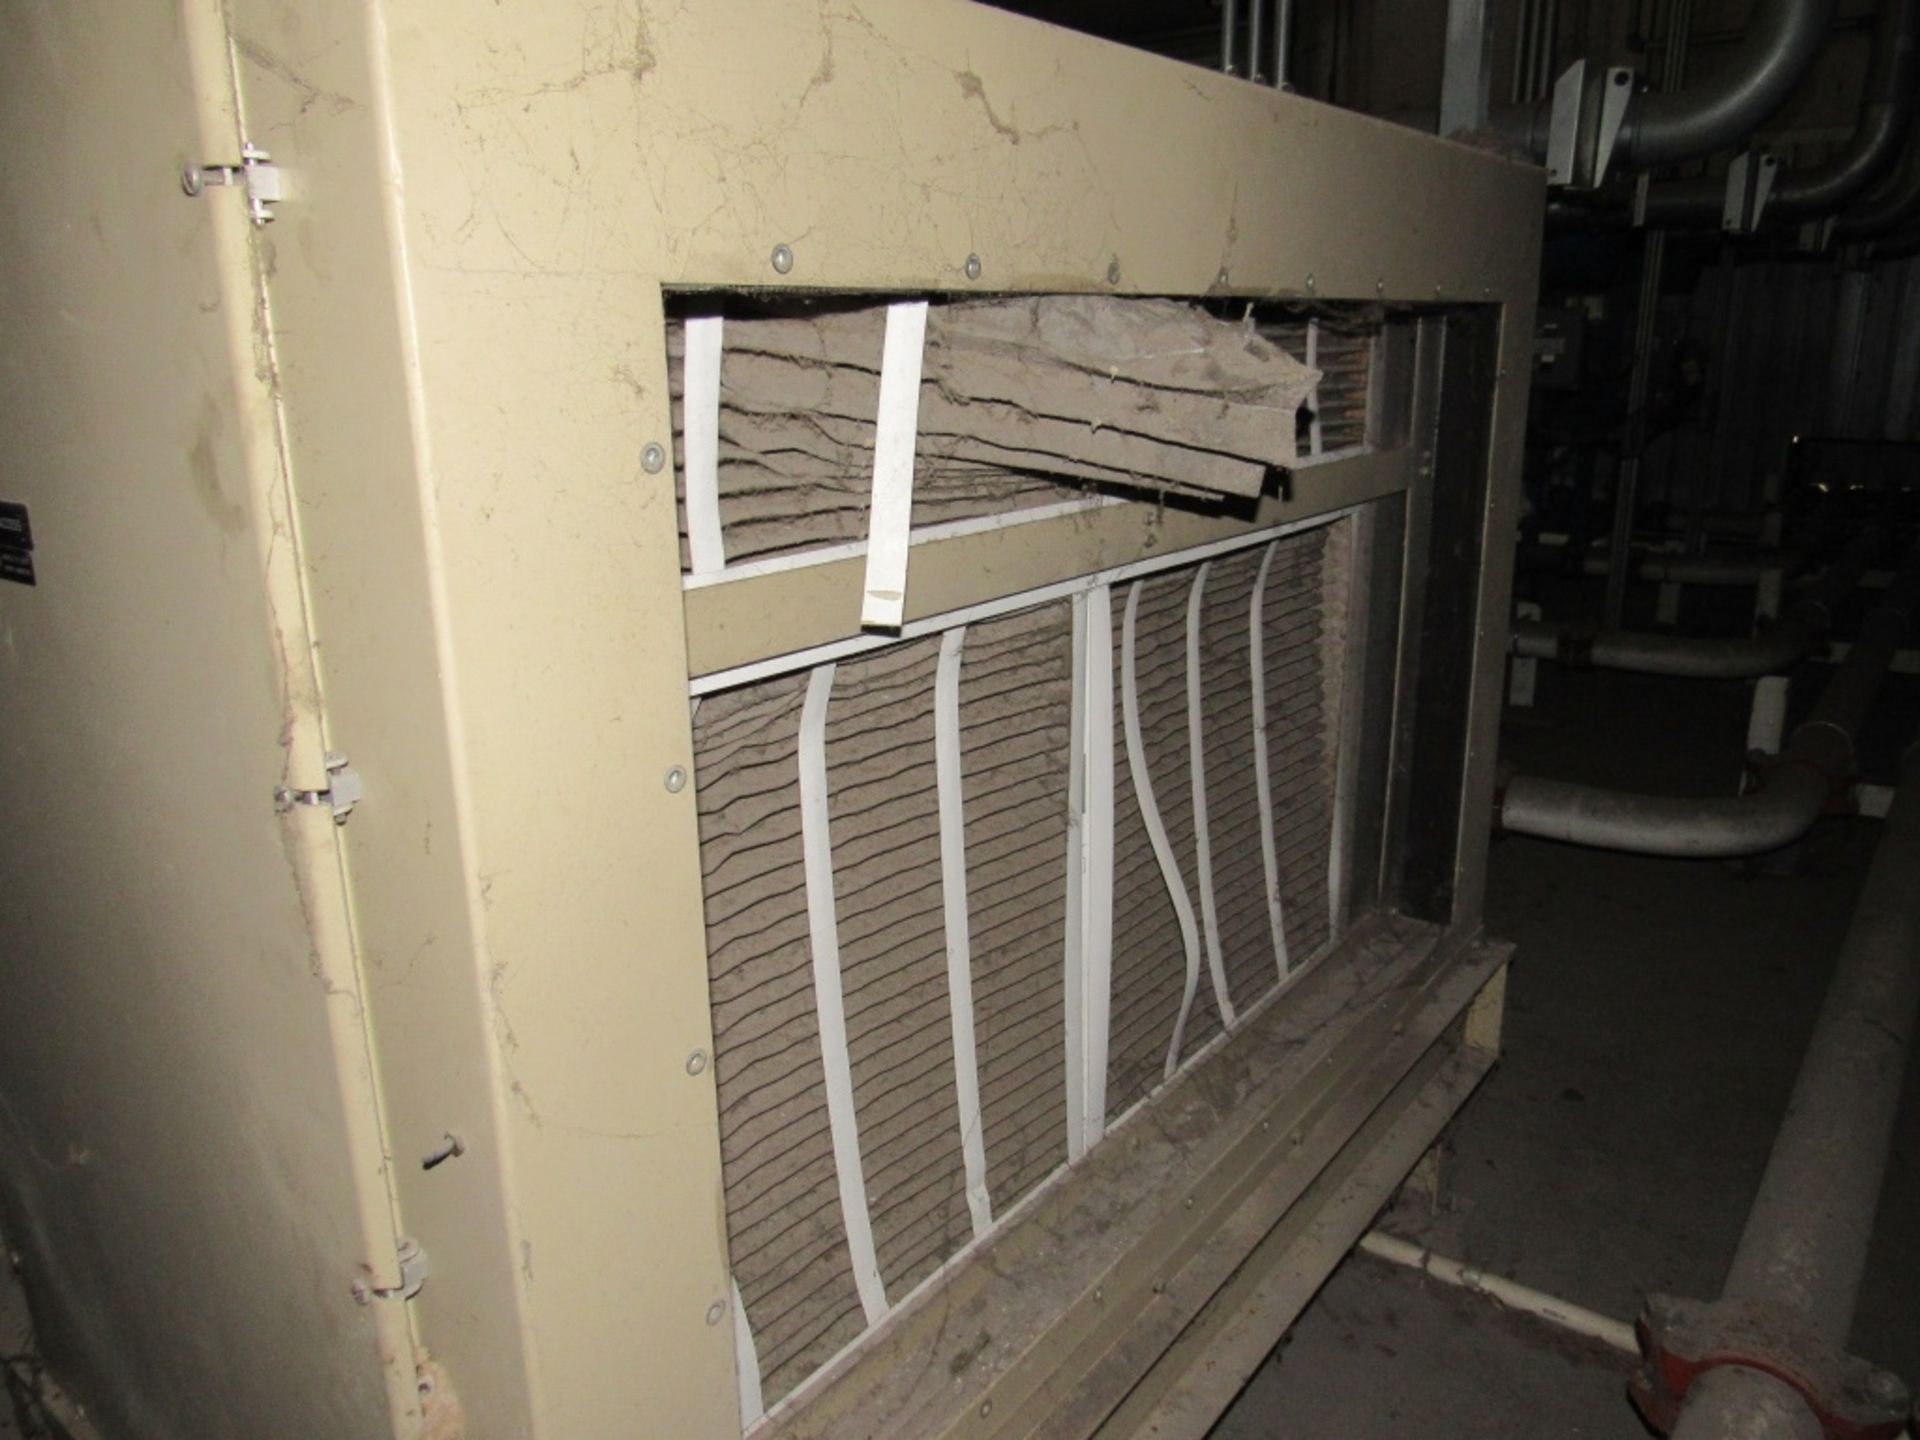 Munters Dehumidifier- Model - HCD-2250-FBA-SFCBS Rigging Fee - $250.00 "TVA will disconnect and - Image 13 of 17